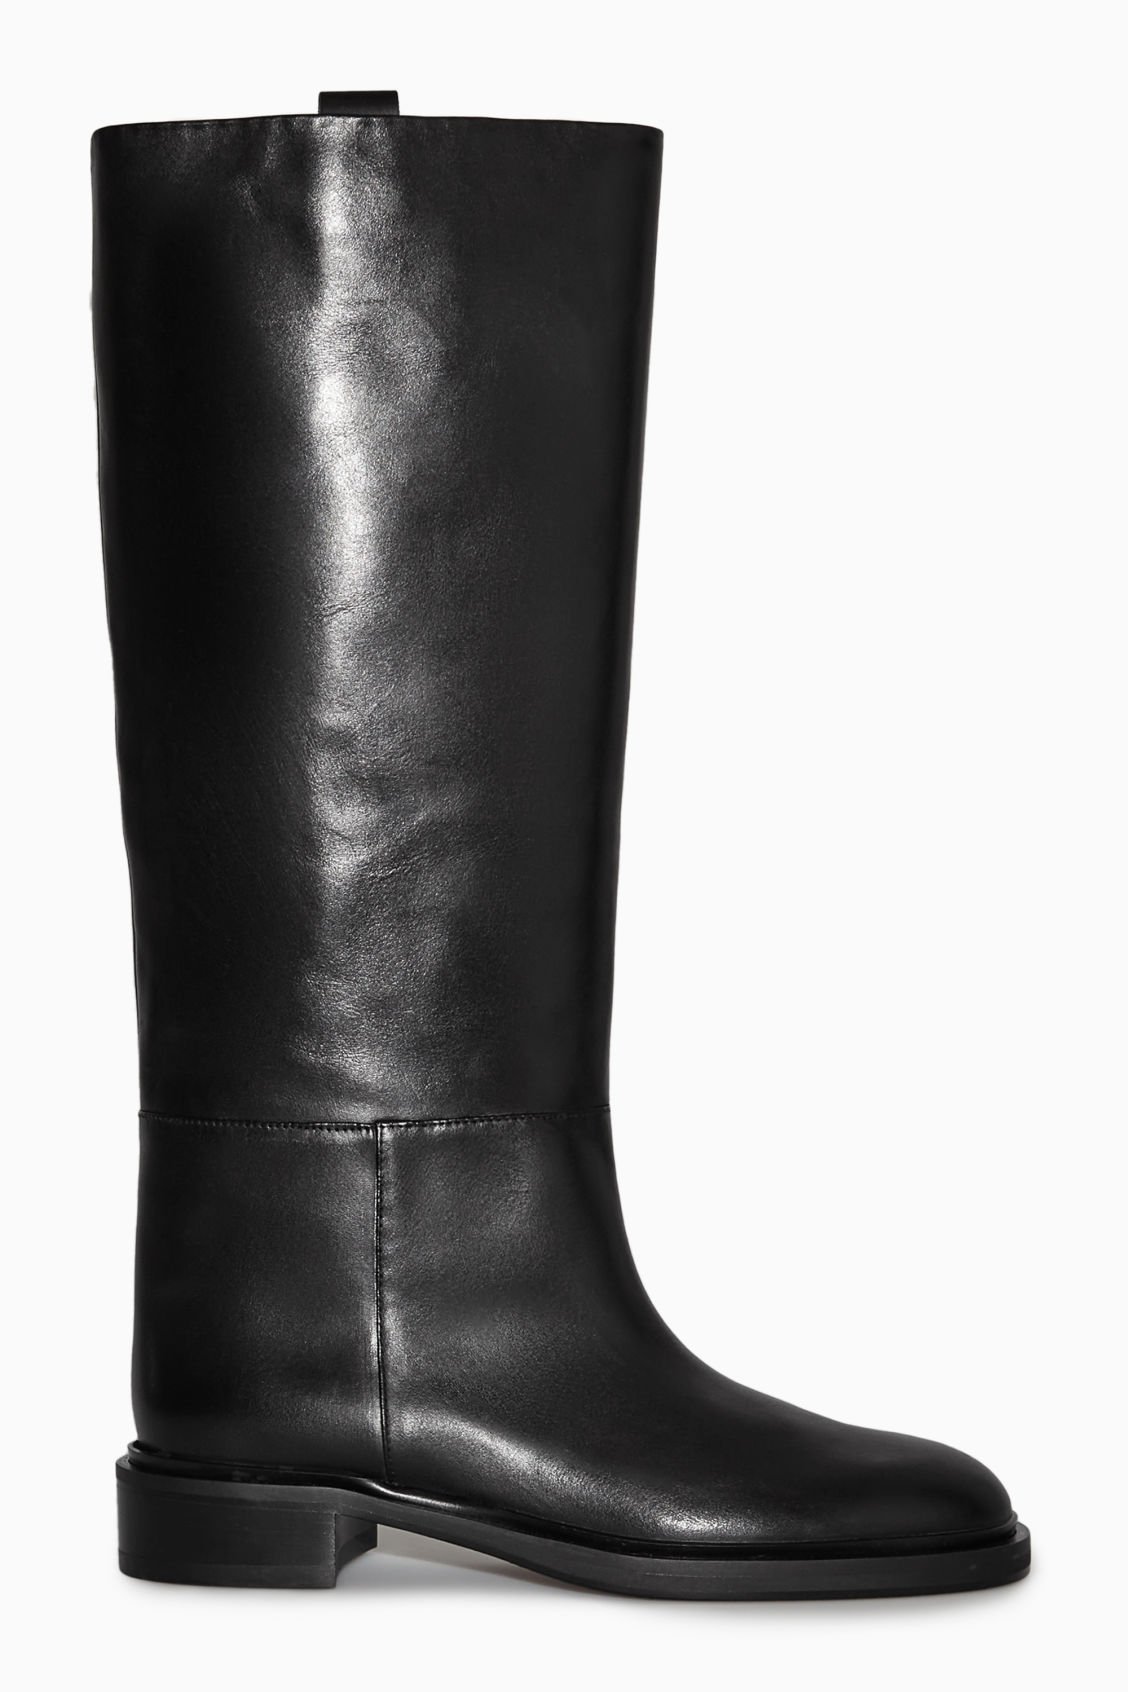 COS Leather Riding Boots in BLACK | Endource